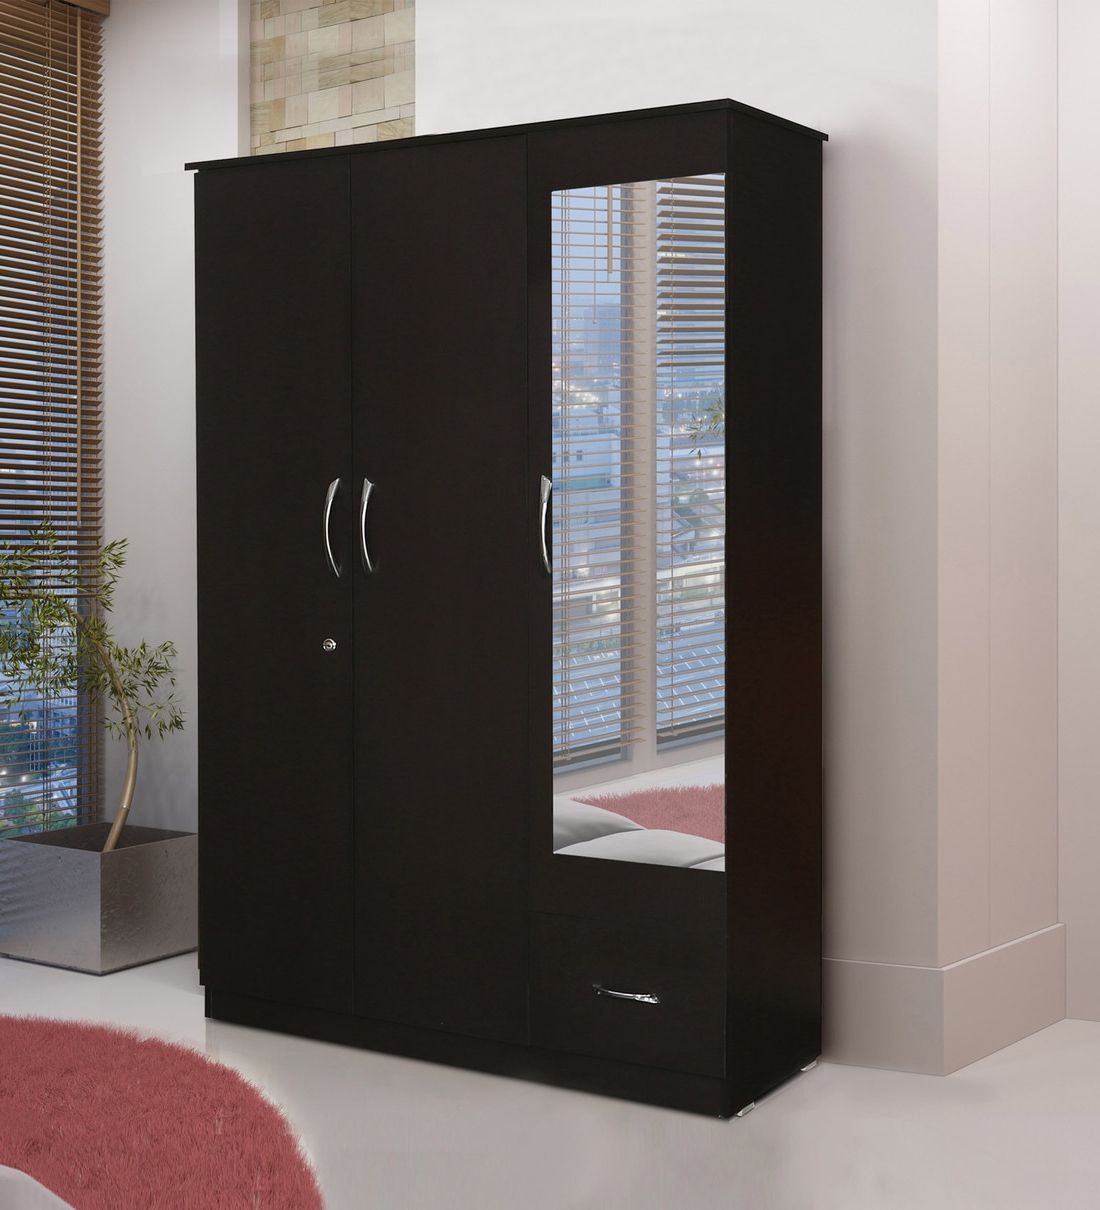 Buy Trois 3 Door Wardrobe In Wenge Finish With Mirror At 22% Off Fullstock | Pepperfry With Regard To 3 Doors Wardrobes With Mirror (View 3 of 20)